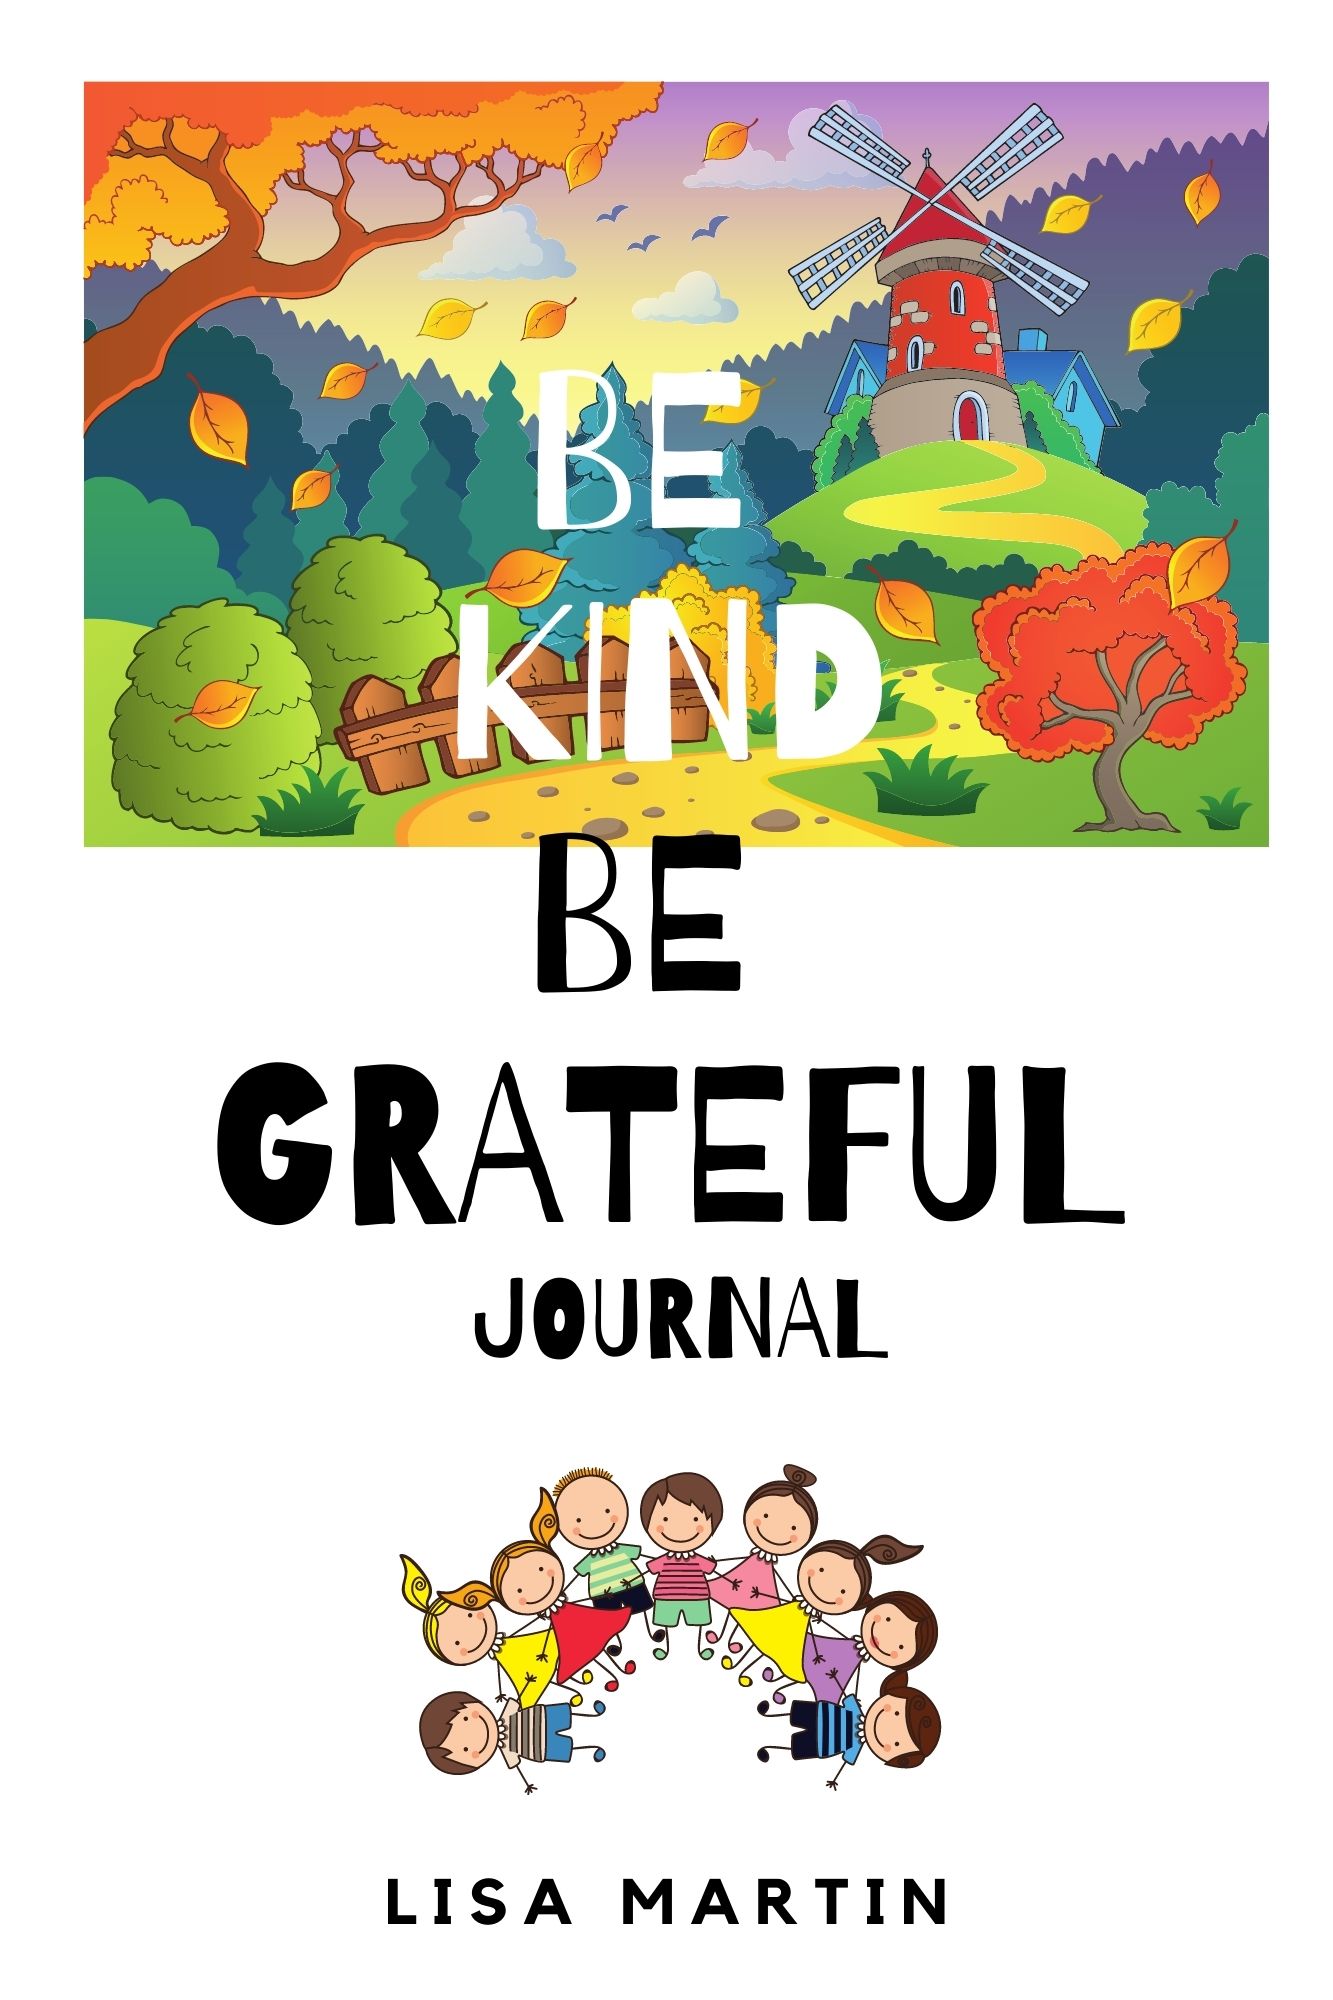 FREE: Be kind be grateful journal by Lisa Martin